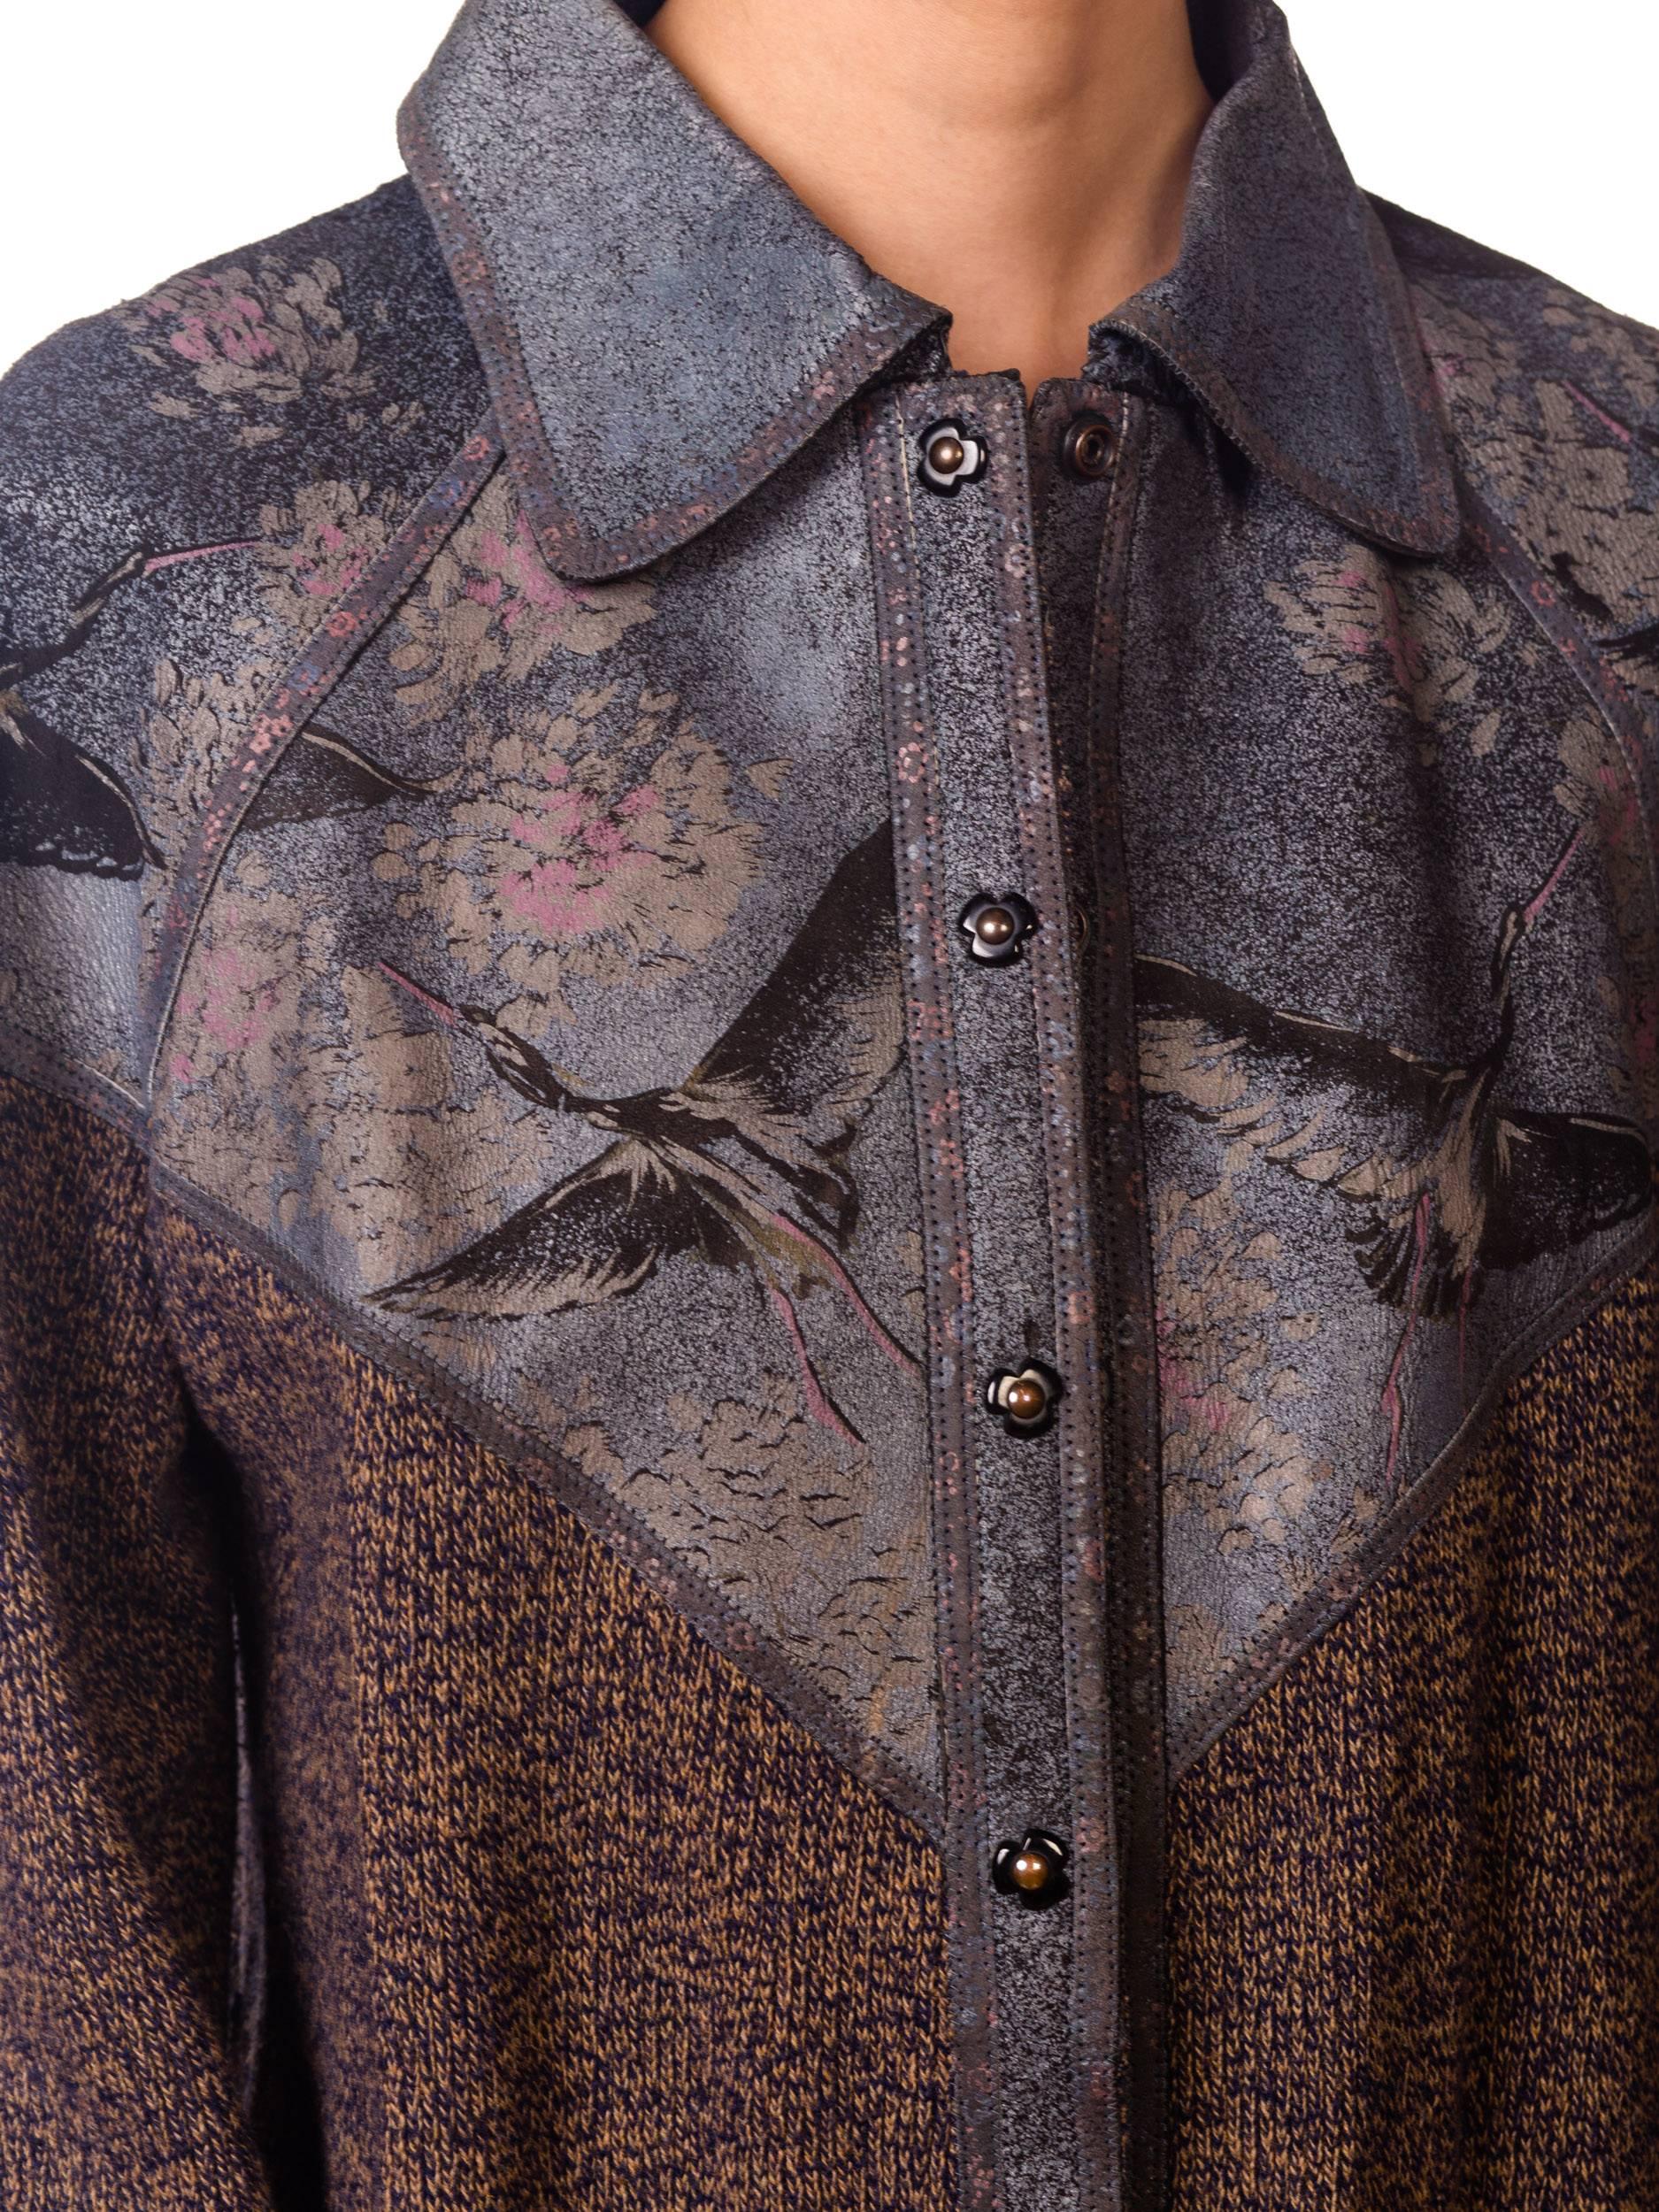 Roberto Cavalli Knit Sweater Jacket with Bird Printed Suede Panels 9